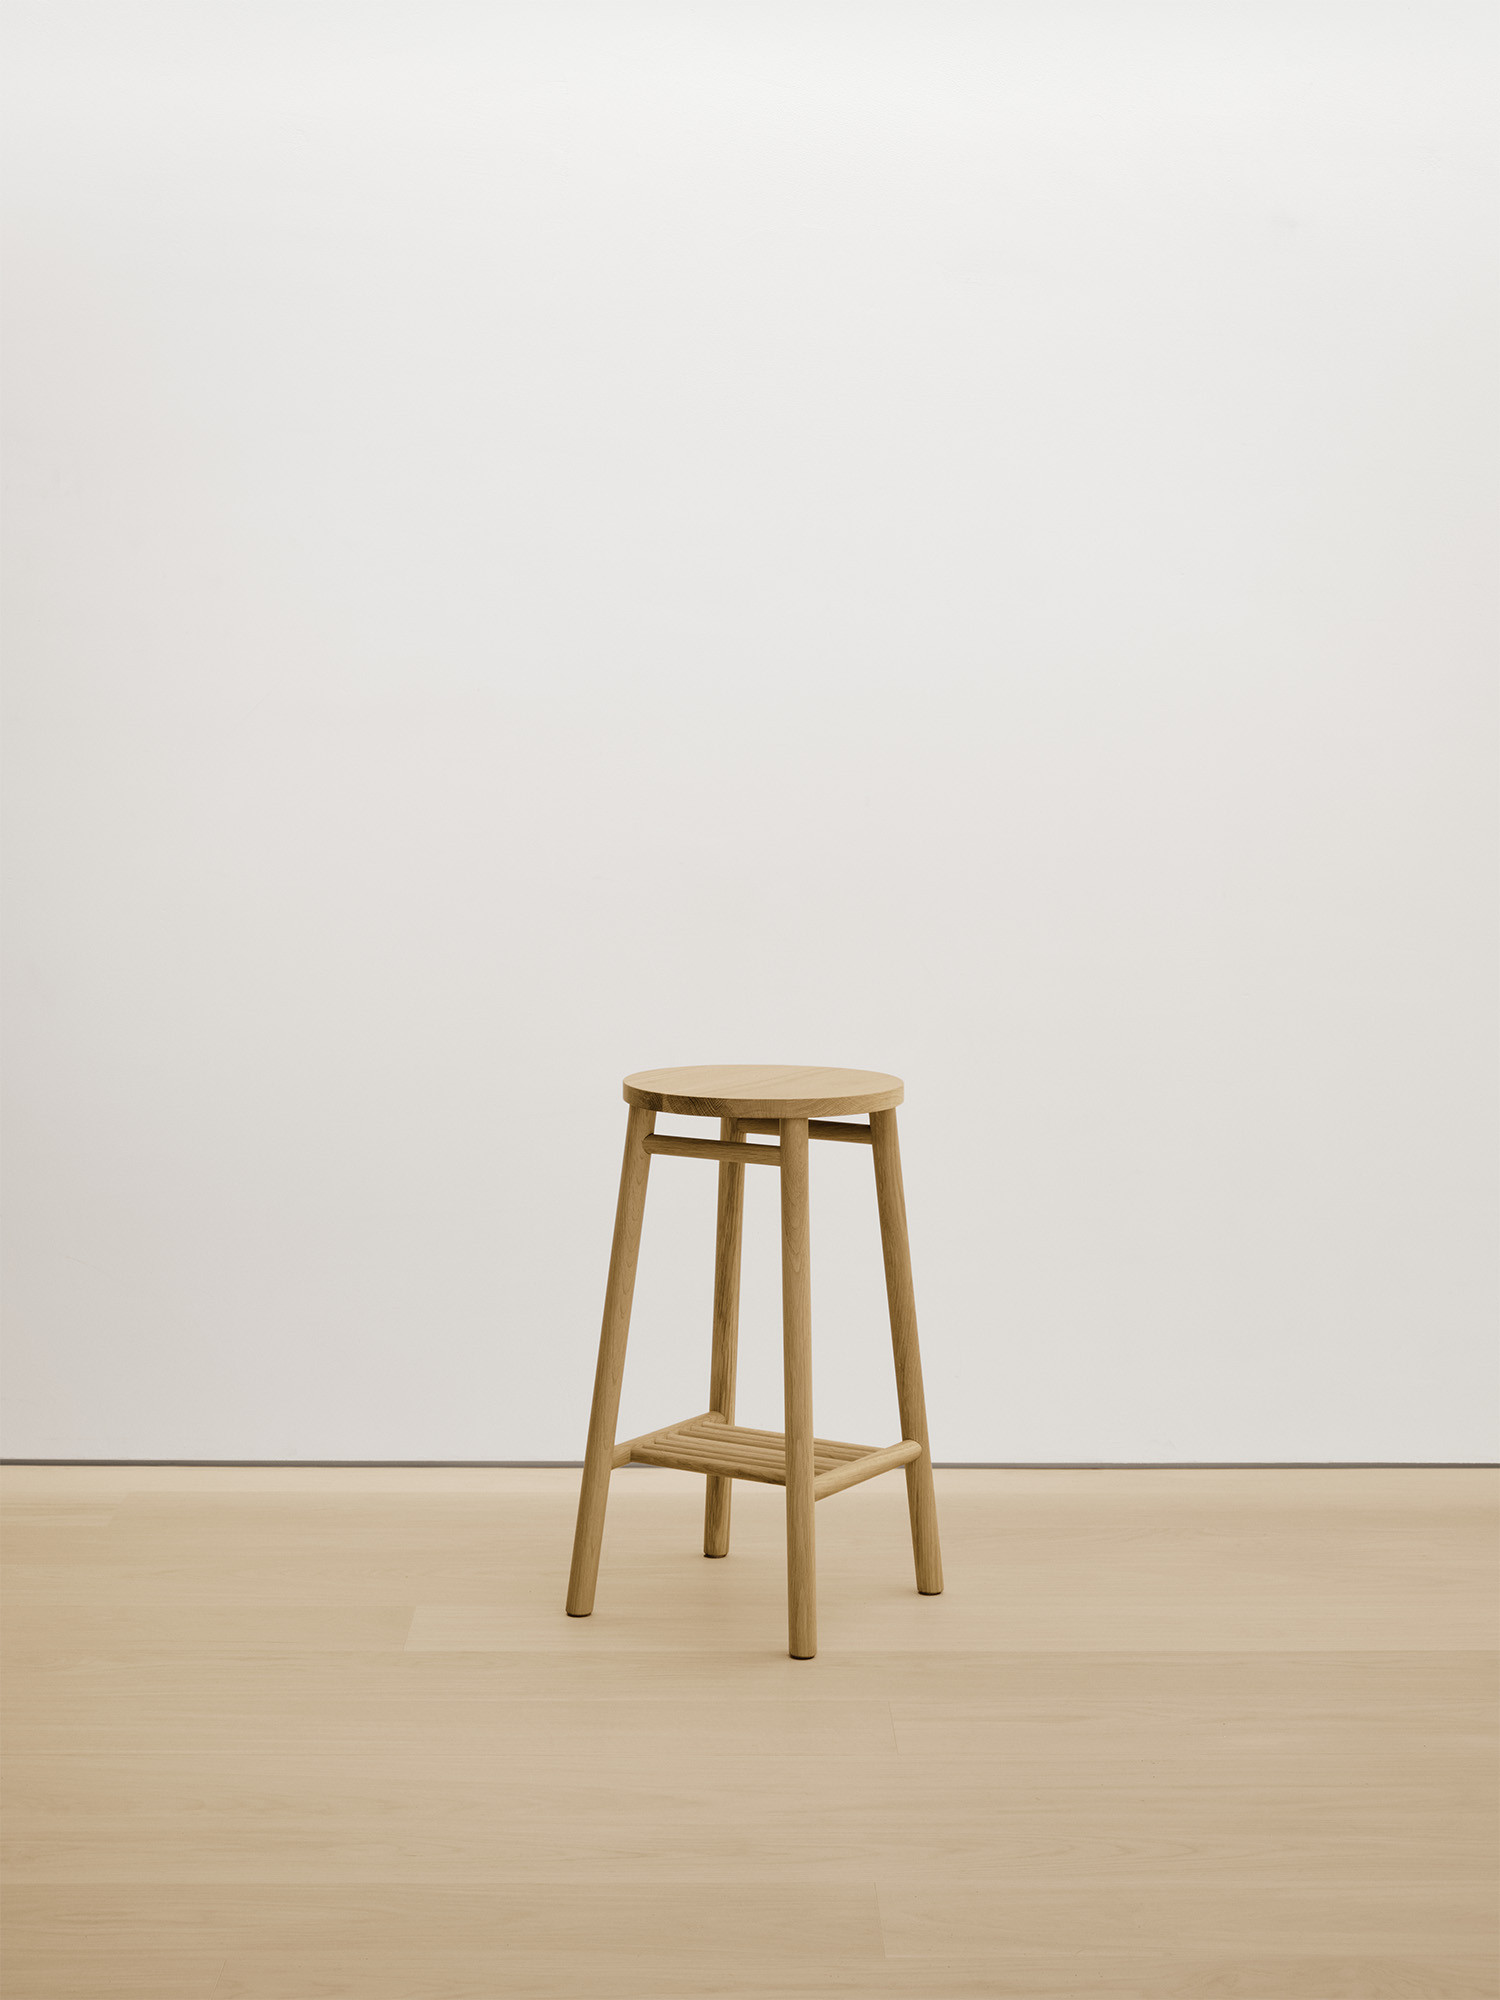   stool with solid wood seat